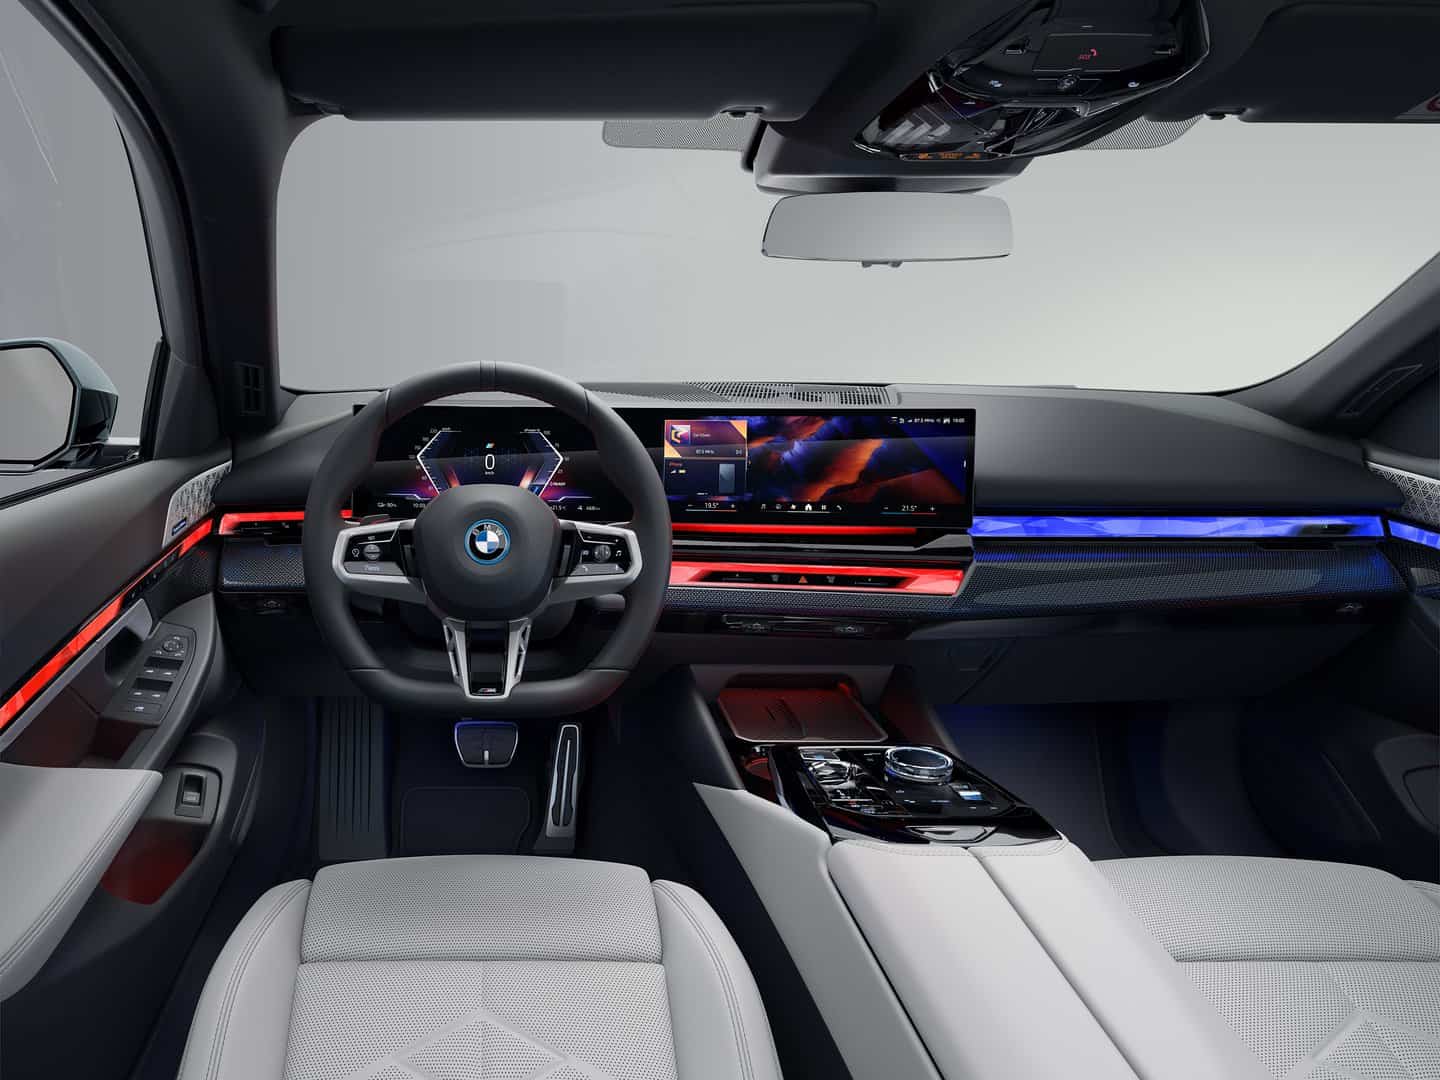 Interior cabin of the new BMW i5 Touring.